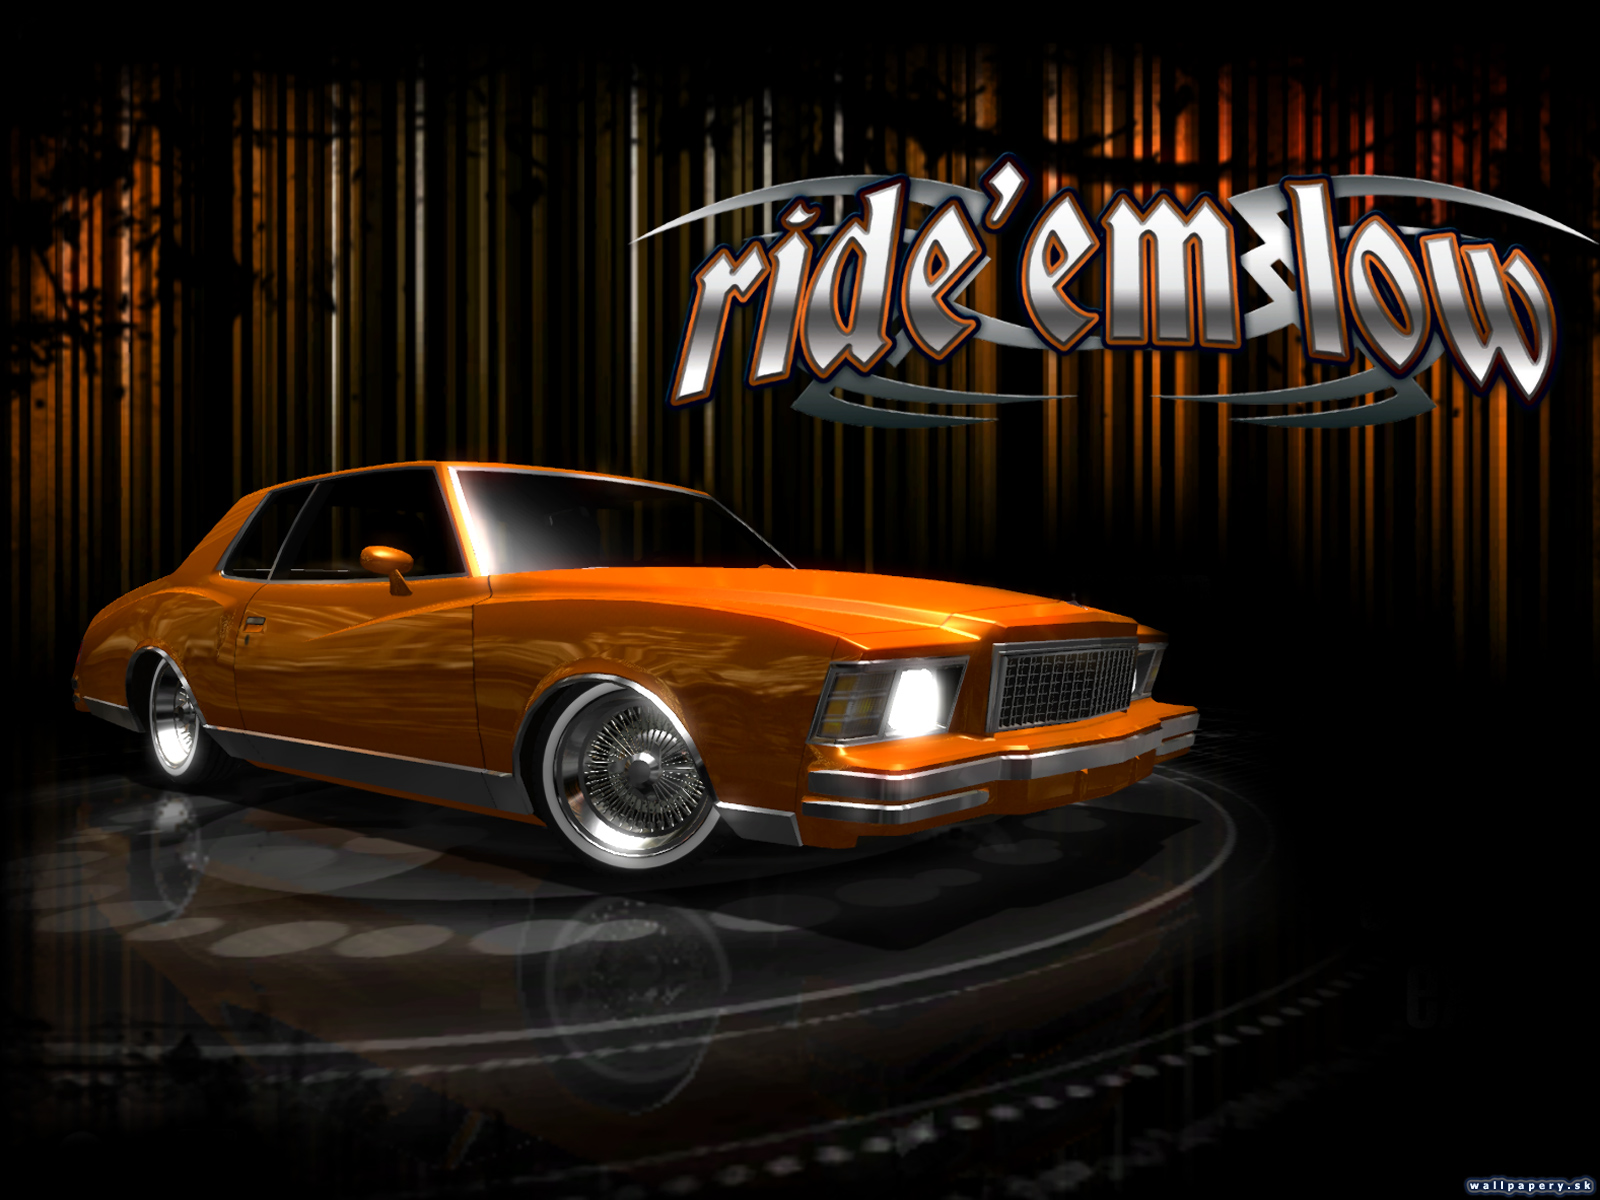 LowRider Extreme - wallpaper 1